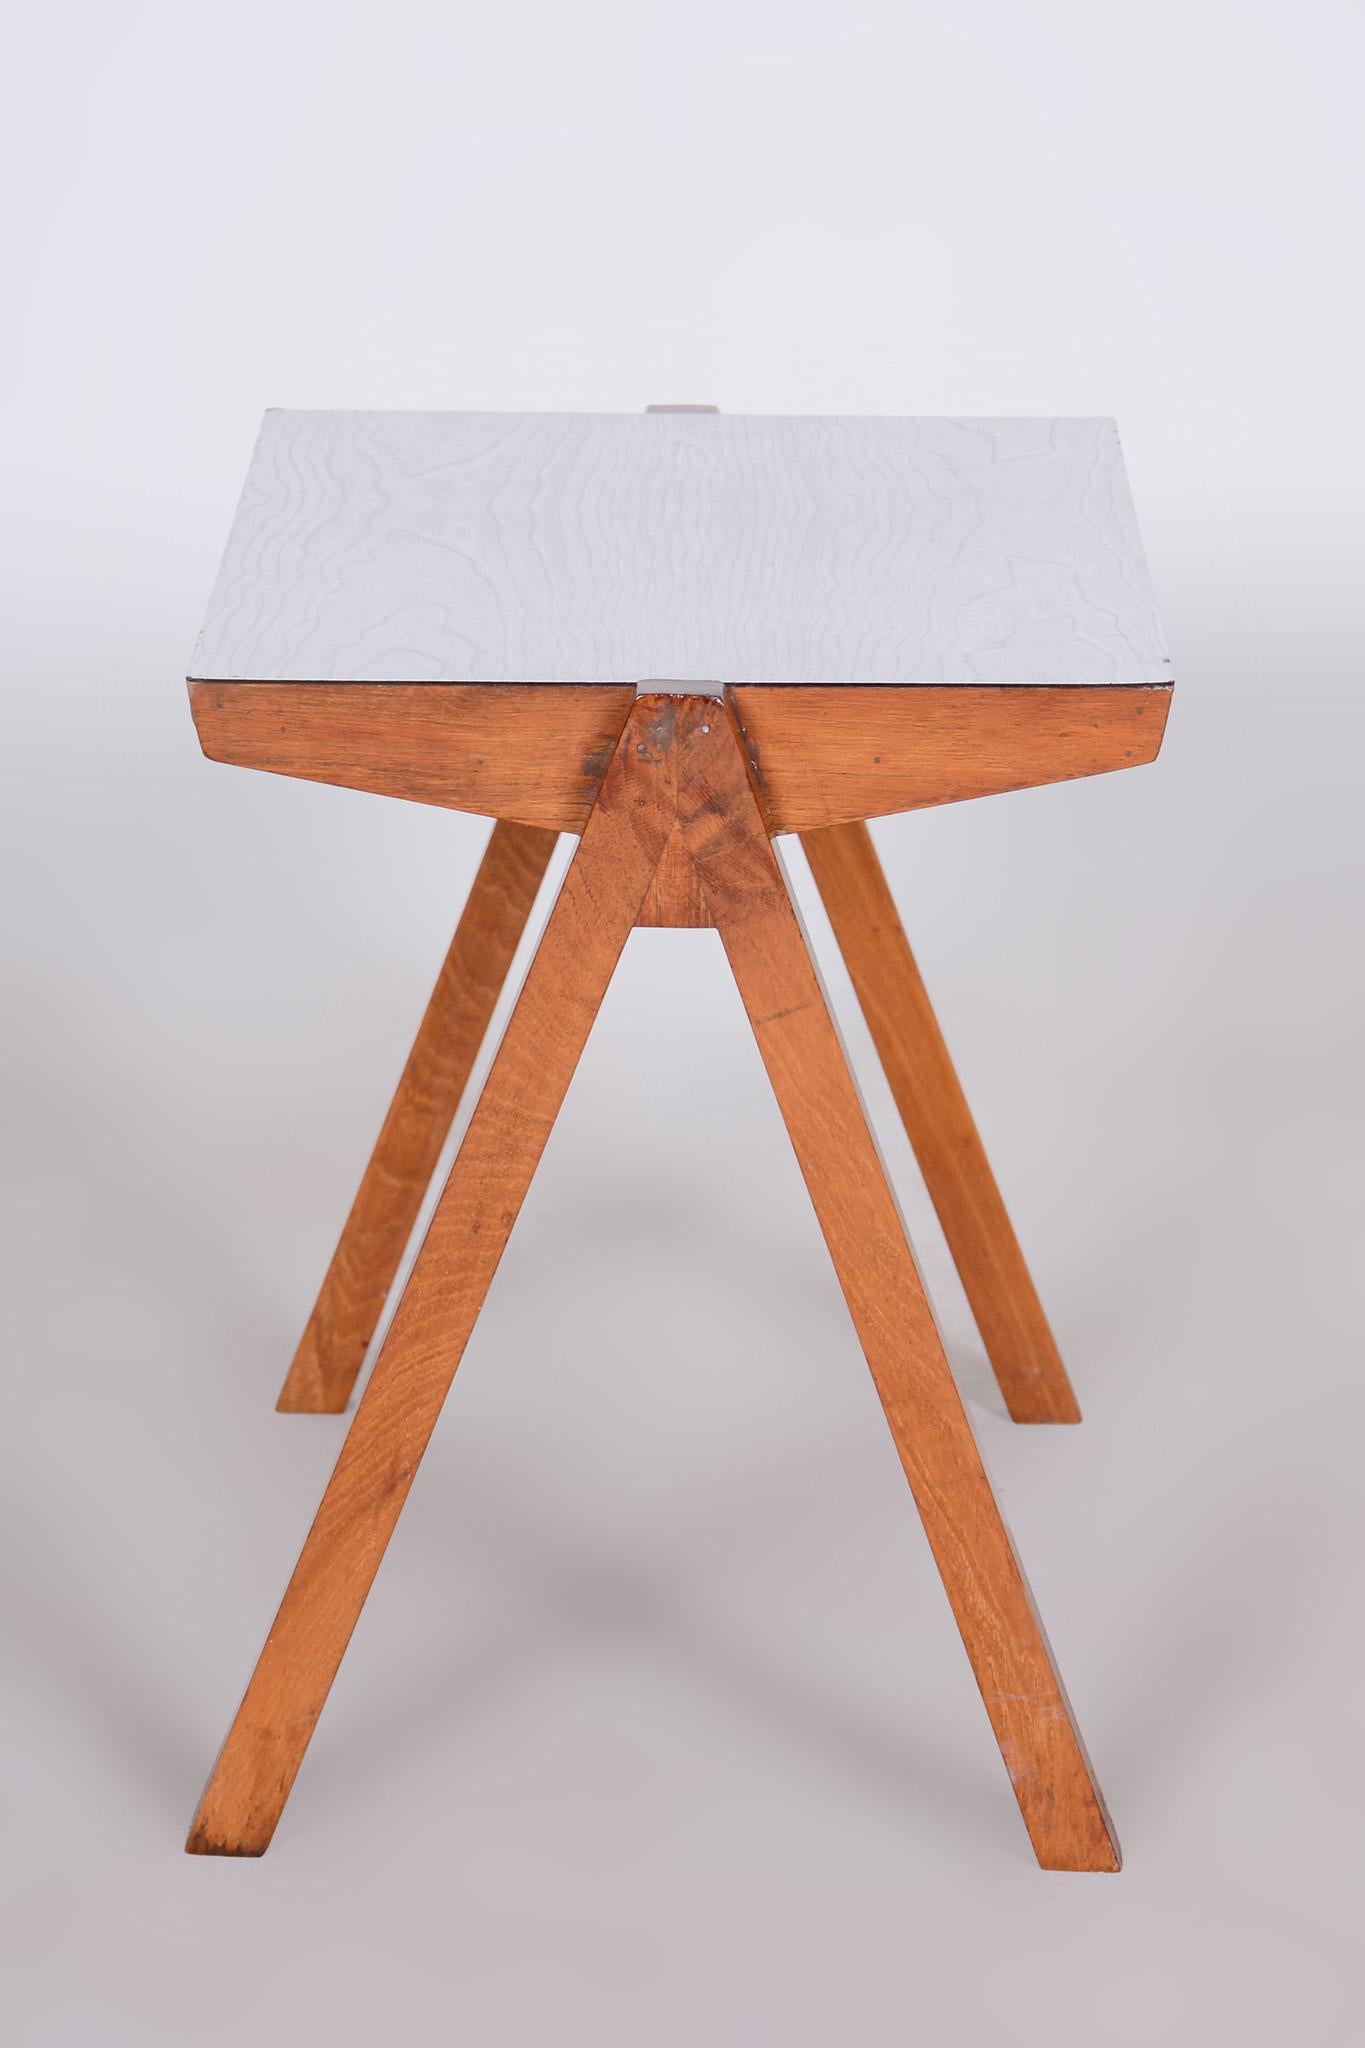 Small Midcentury Table, Beech, Umakart, Restored, Czechia, 1950s In Good Condition For Sale In Horomerice, CZ